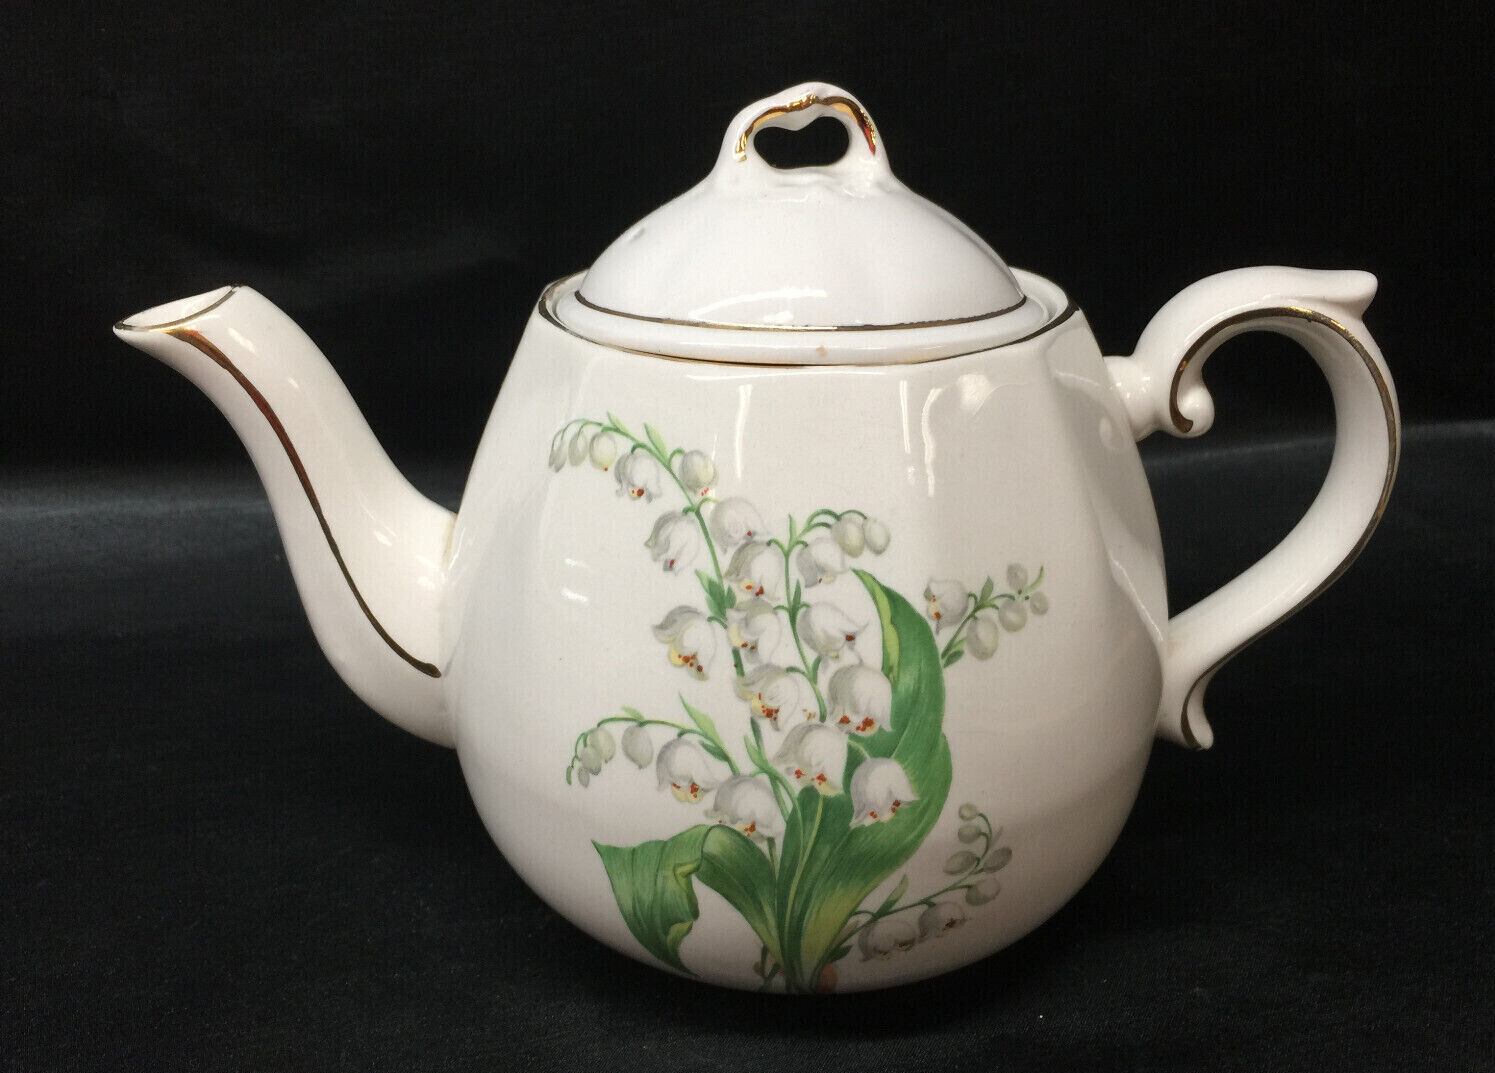 VINTAGE * ELLGREAVE ENGLAND TEAPOT WHITE FLOWERS FLORAL GOLD ACCENTS * NUMBERED